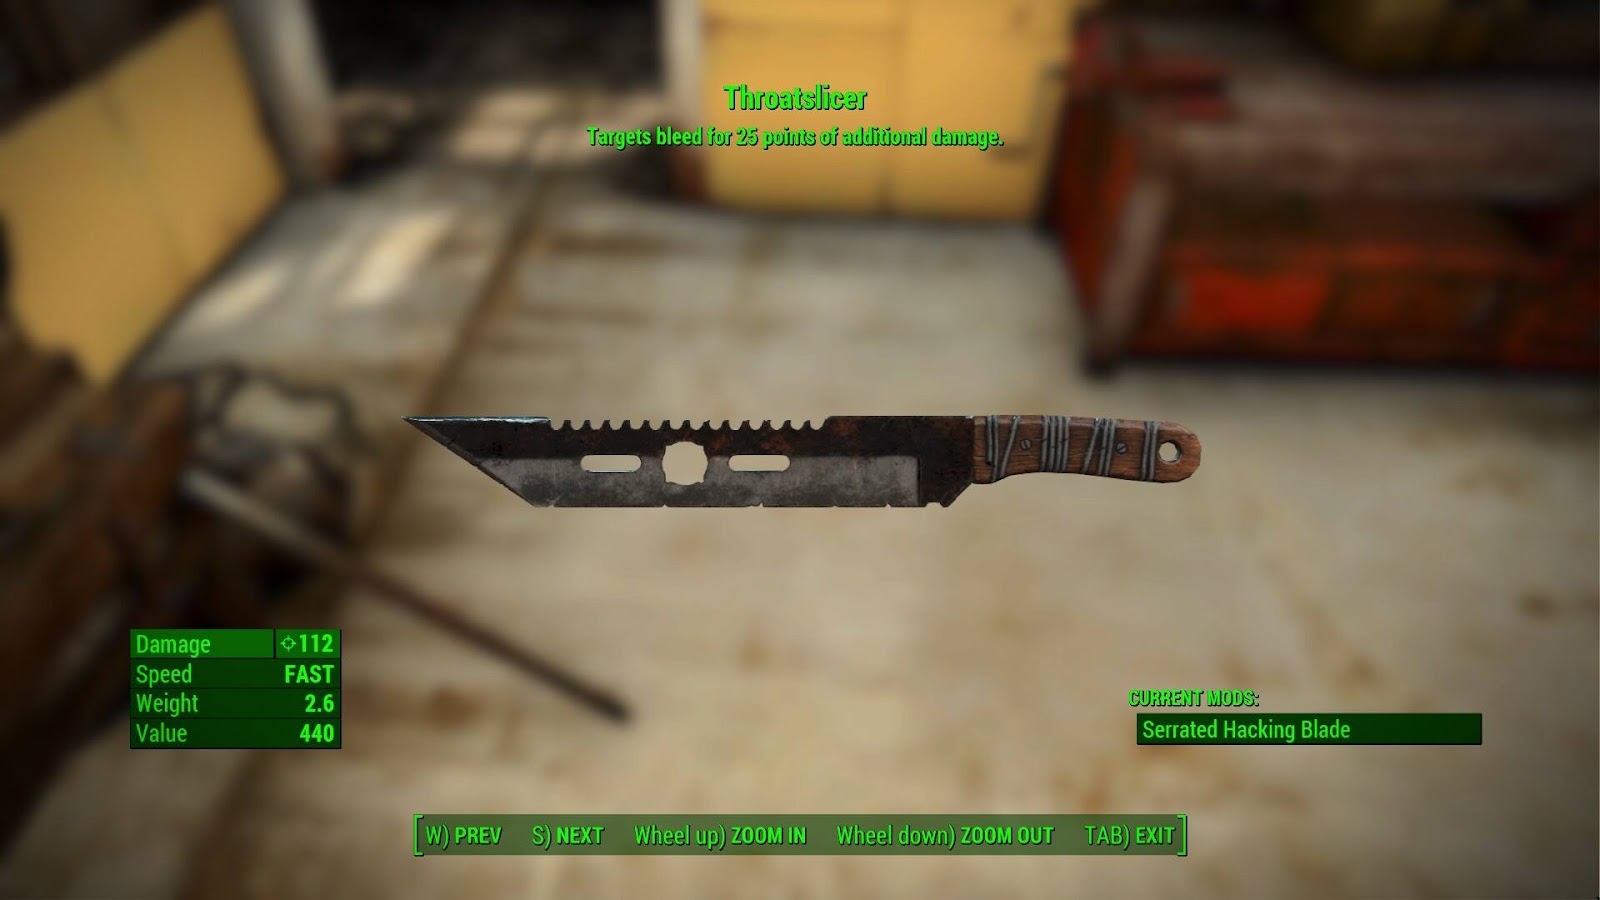 Thoratslicer, a single-edged knife that's serrated on the blunt side,  viewed through the inventory UI of Fallout 4.